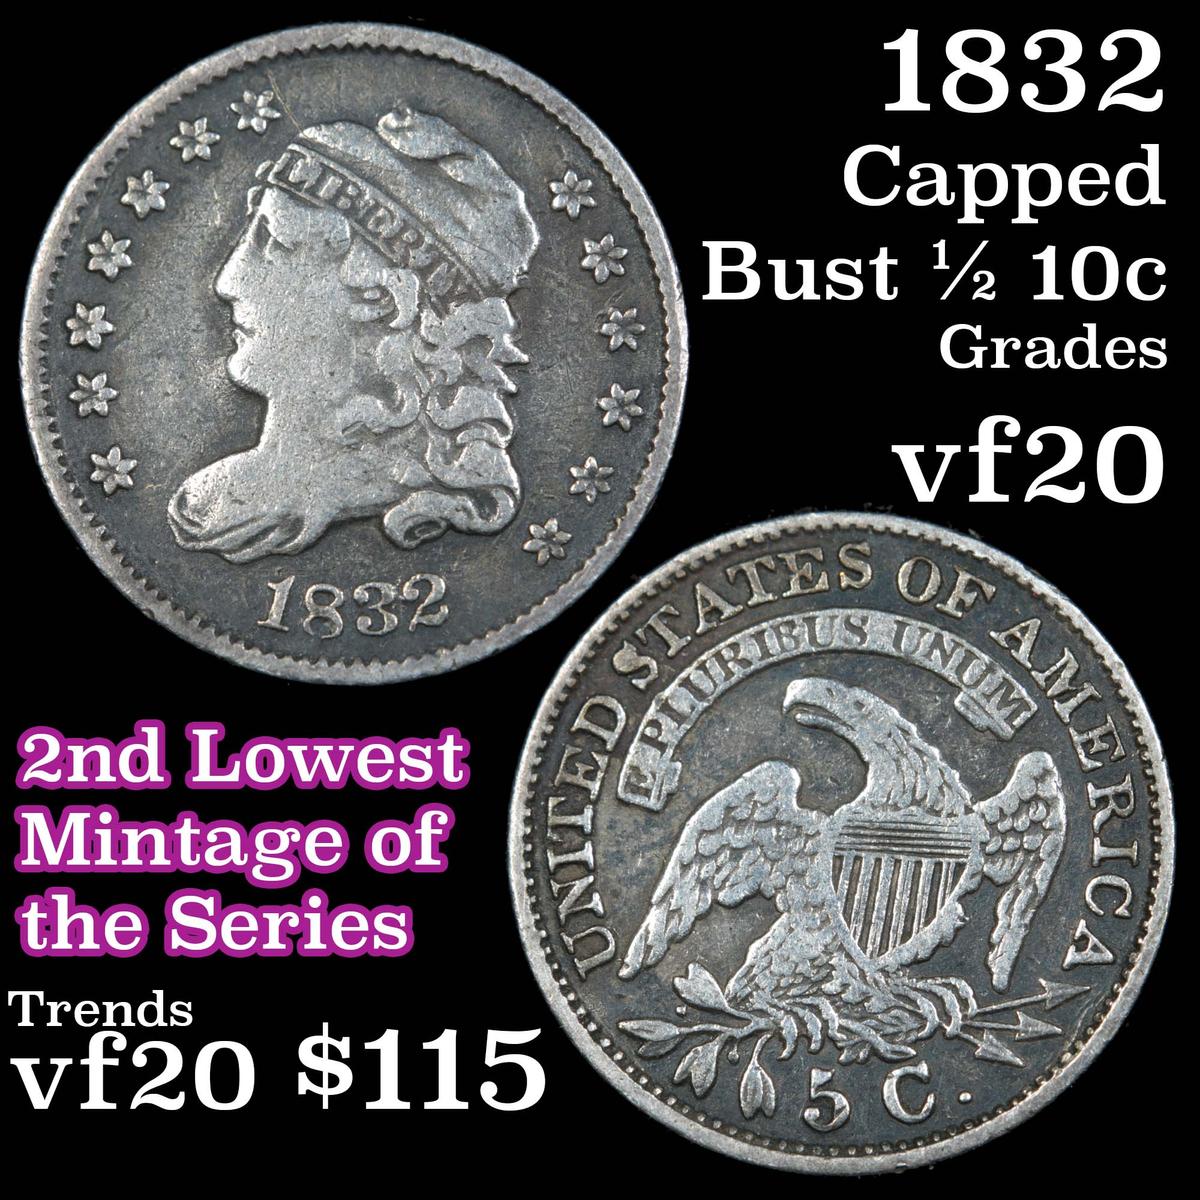 1832 Capped Bust Half Dime 1/2 10c Grades vf, very fine